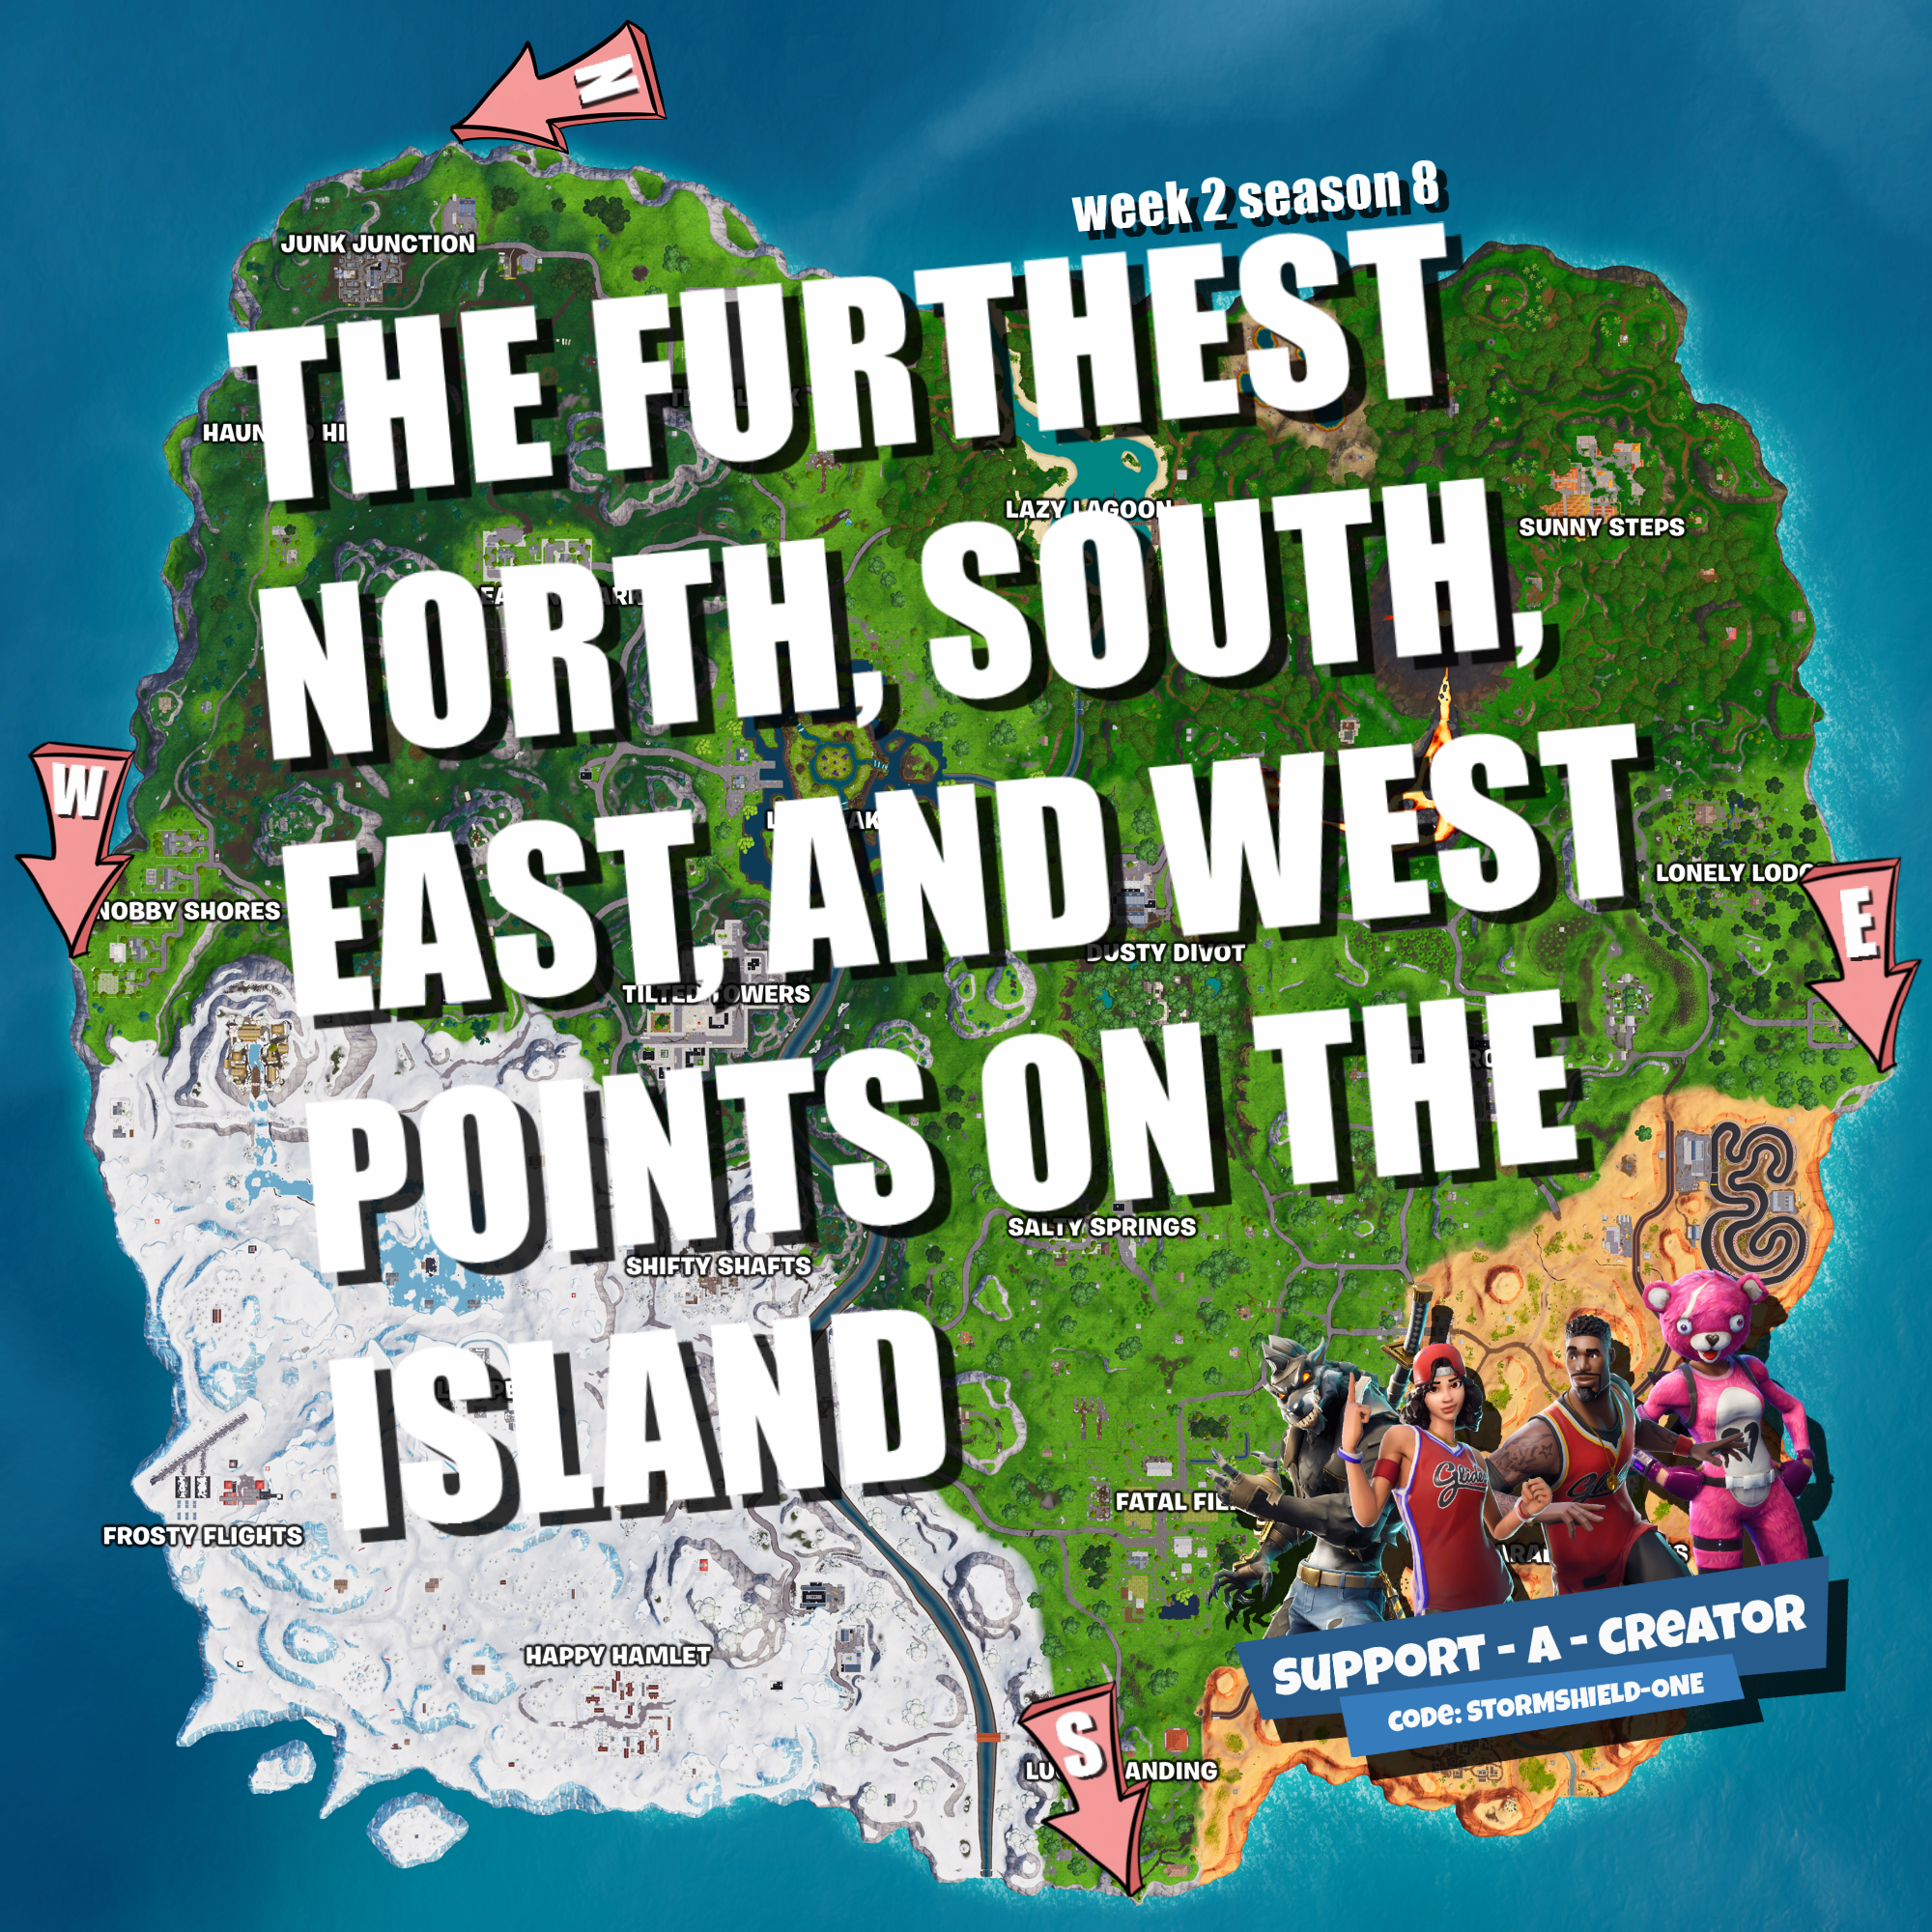 visit the furthest north south east and west points of the island right click view image for full resolution - fortnite visit the furthest north south east and west points of the island